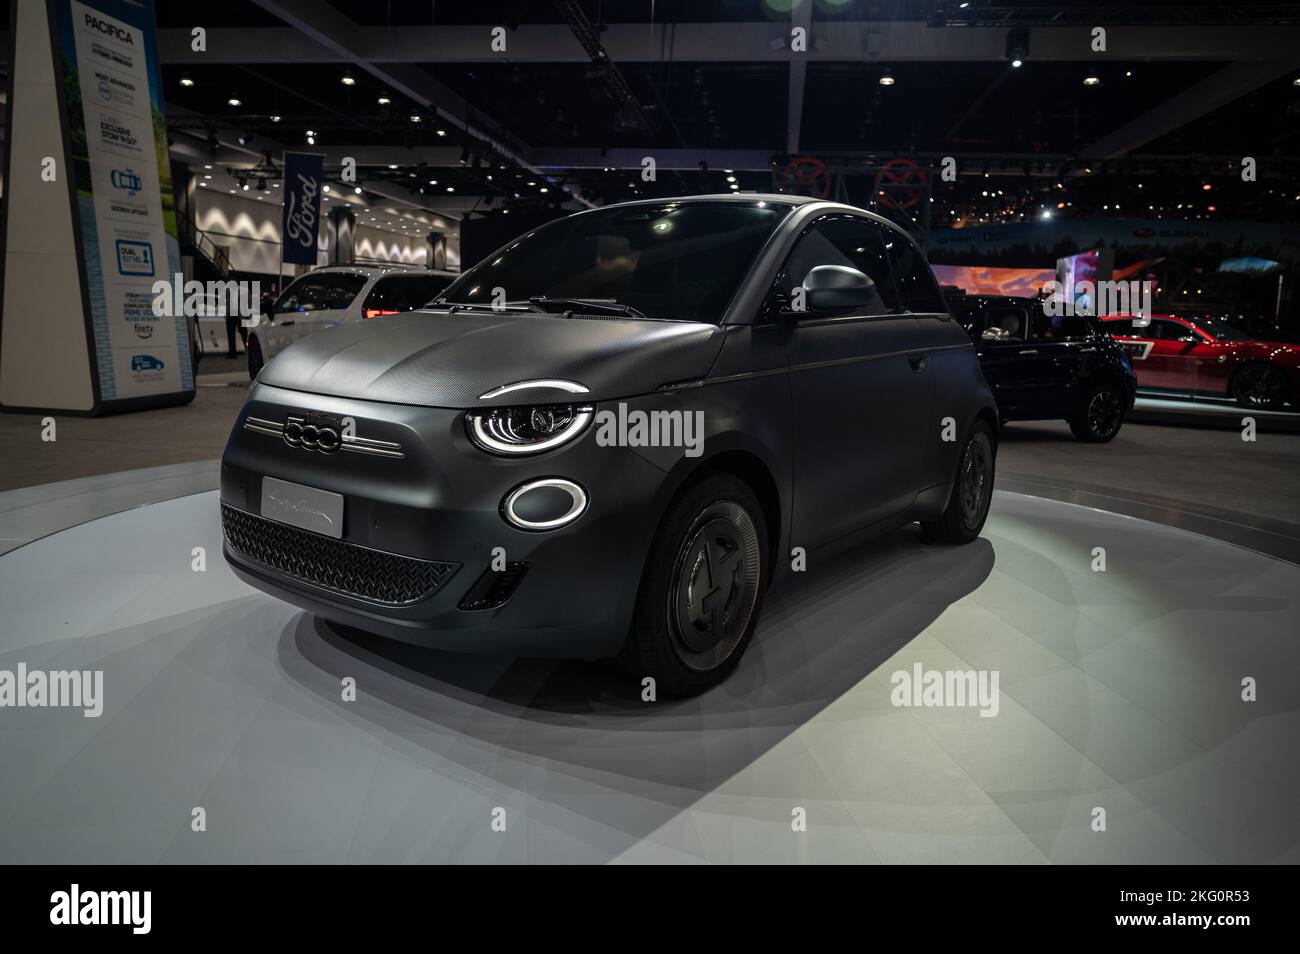 Los Angeles - USA - November 17, 2022: Uncovered Fiat 500 during LA Auto Show at Los Angeles Convention Center. Stock Photo